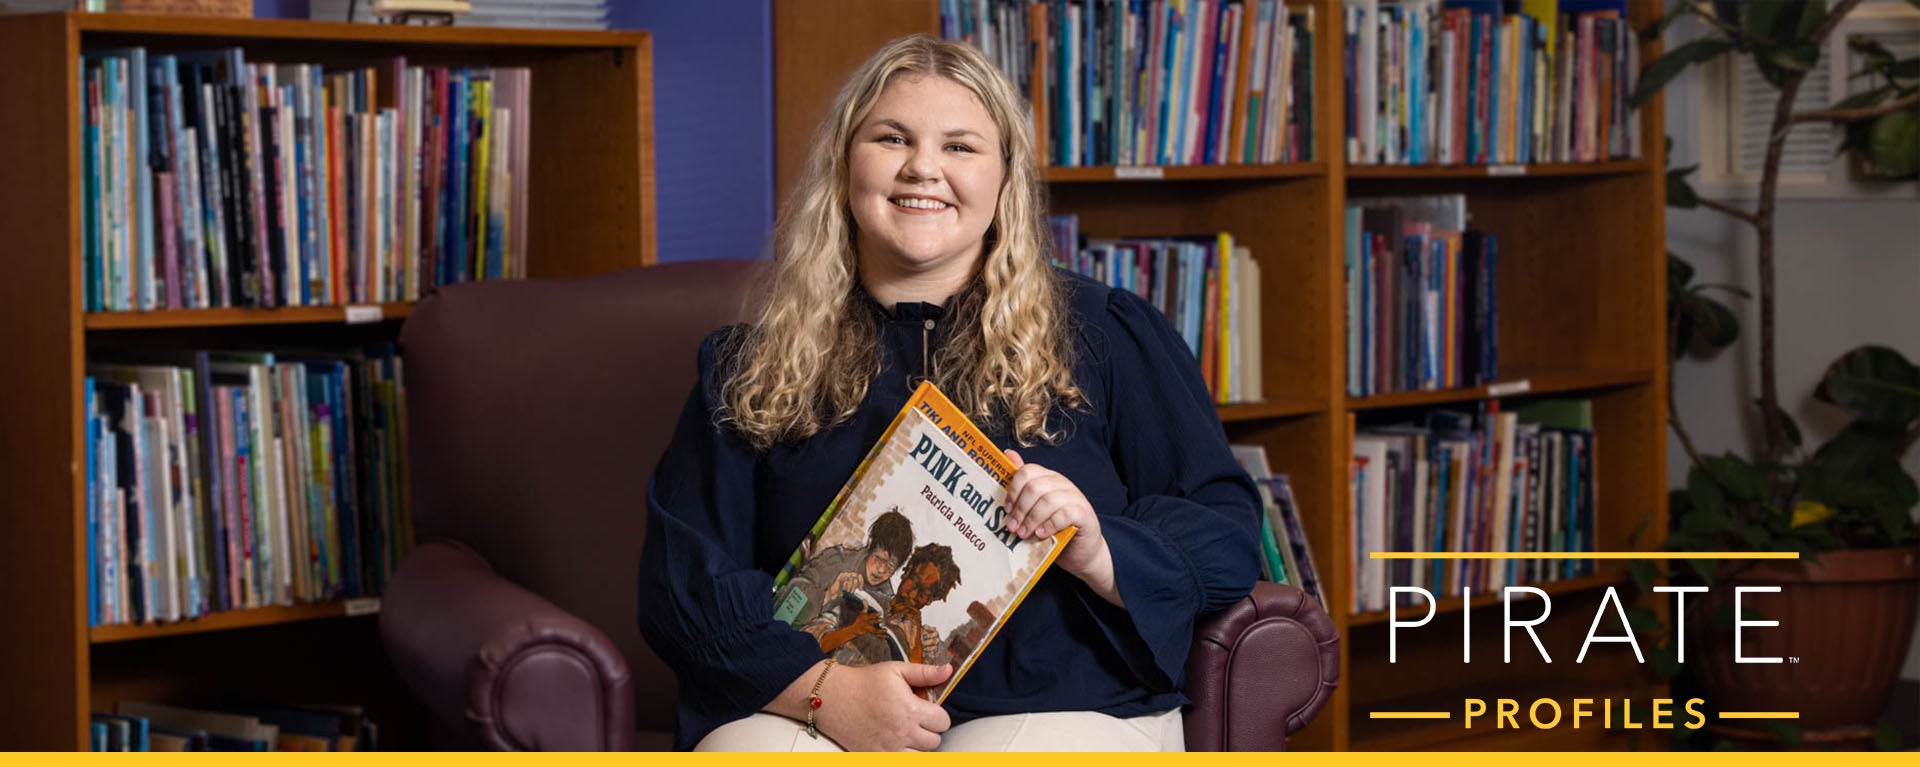 Calli Jon Massengill is an Honors College student who is using her passion for helping others to teach underprivileged and special education students.